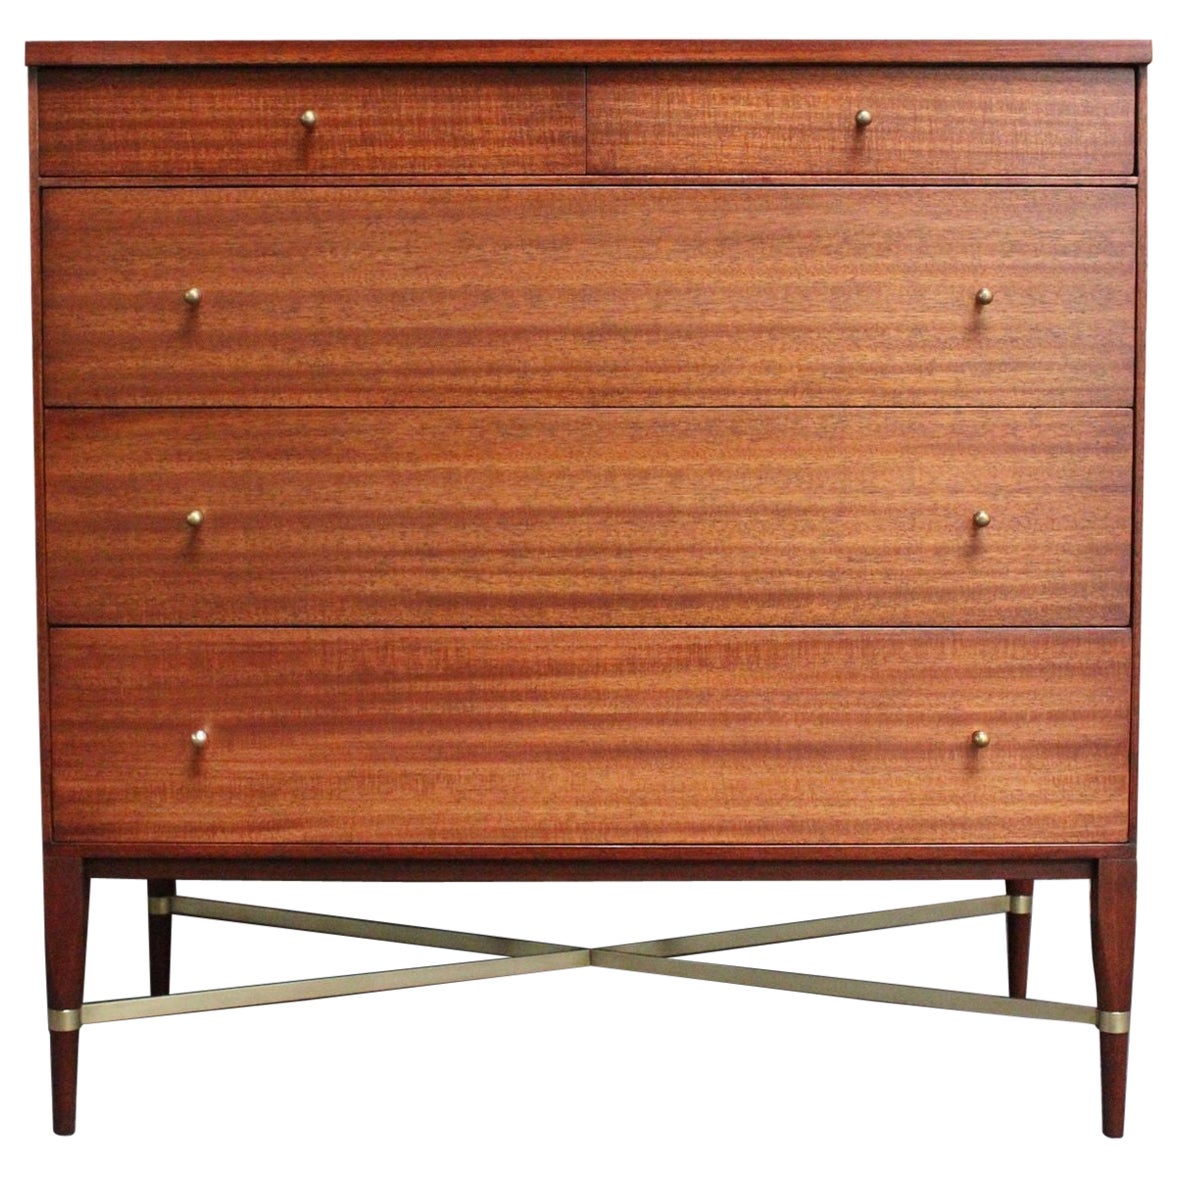 Paul Mccobb Calvin Group Mahogany and Brass Five-Drawer Chest / Dresser